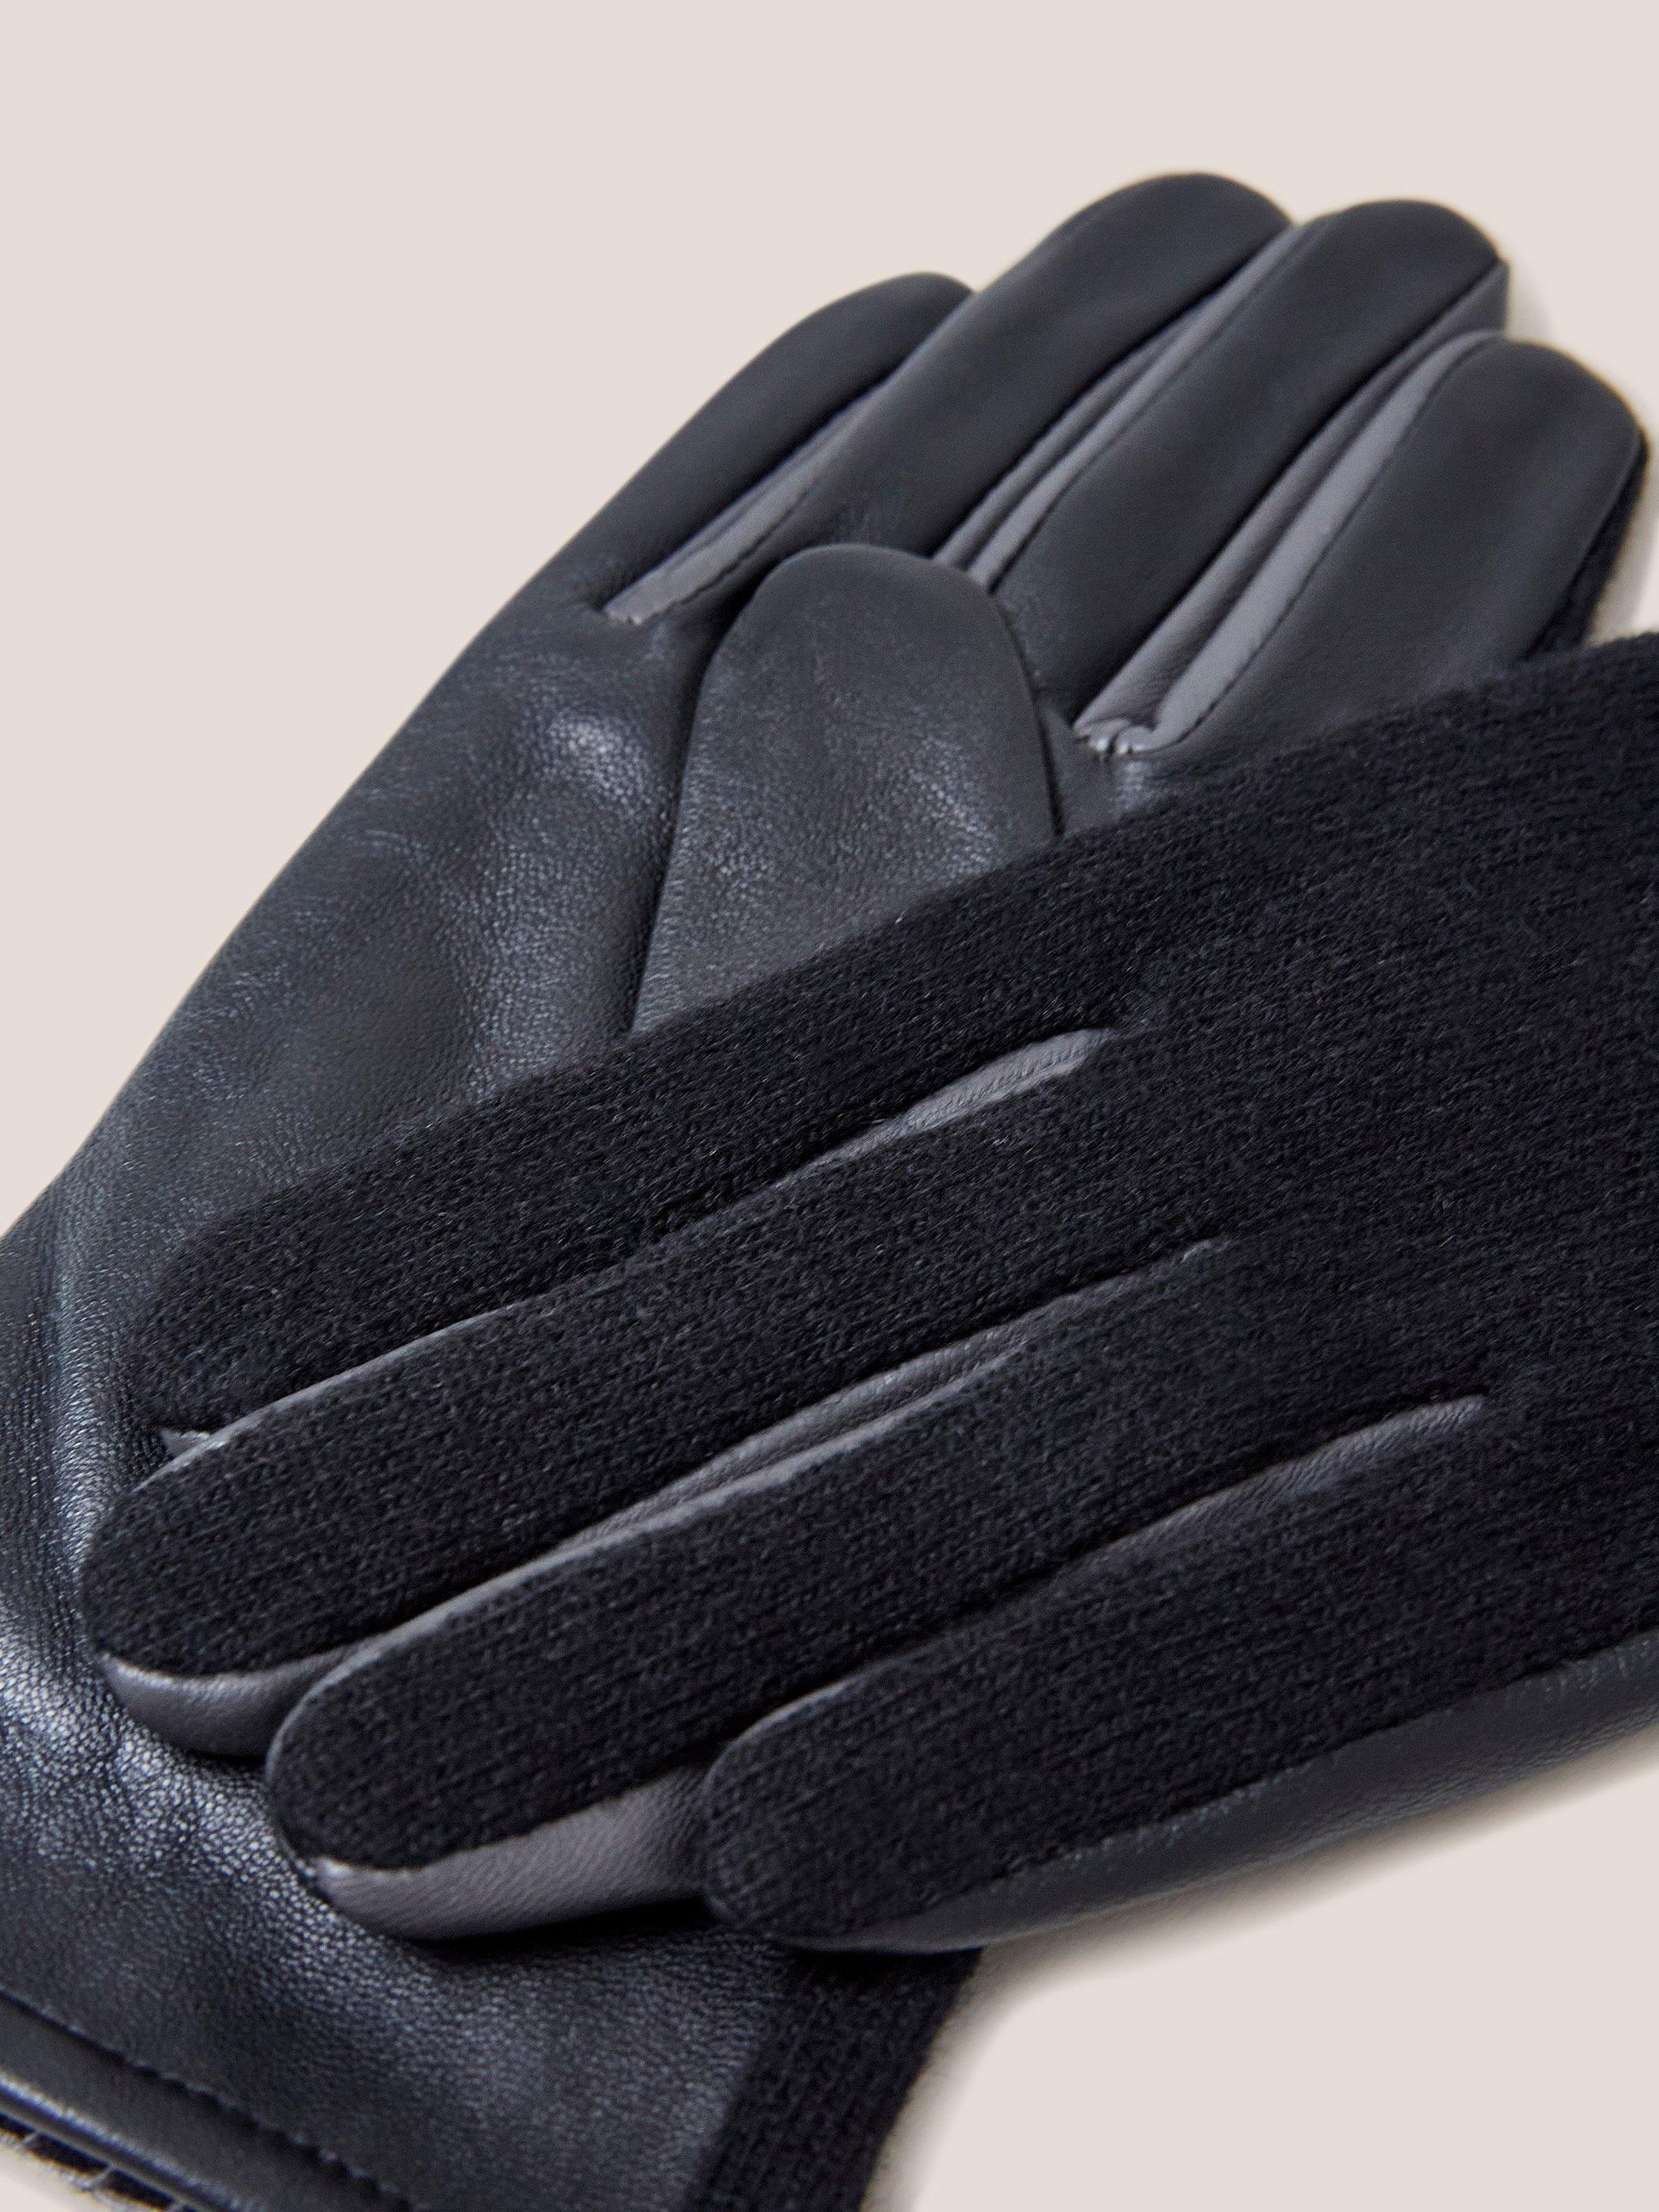 Lucie Leather Glove in PURE BLK - FLAT DETAIL